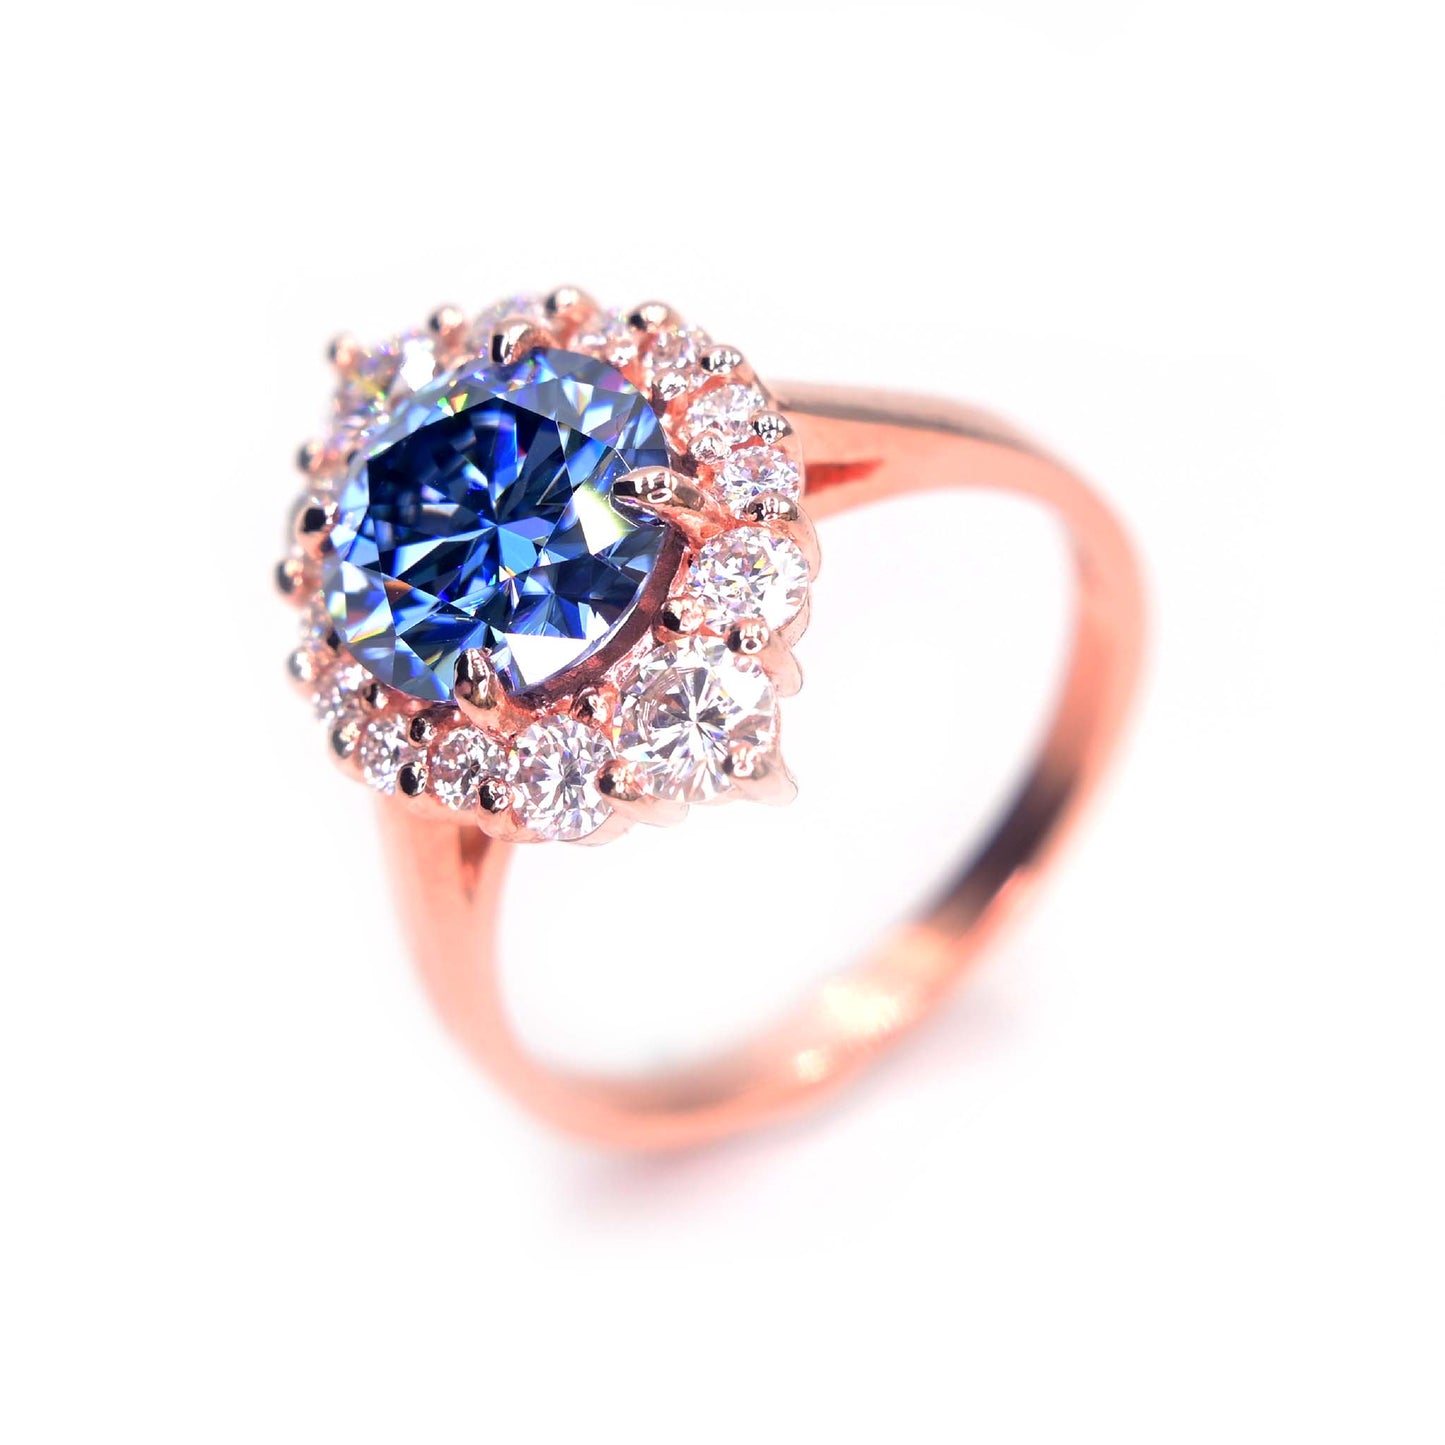 Different view of the blue moissanite ring in 14k rose gold